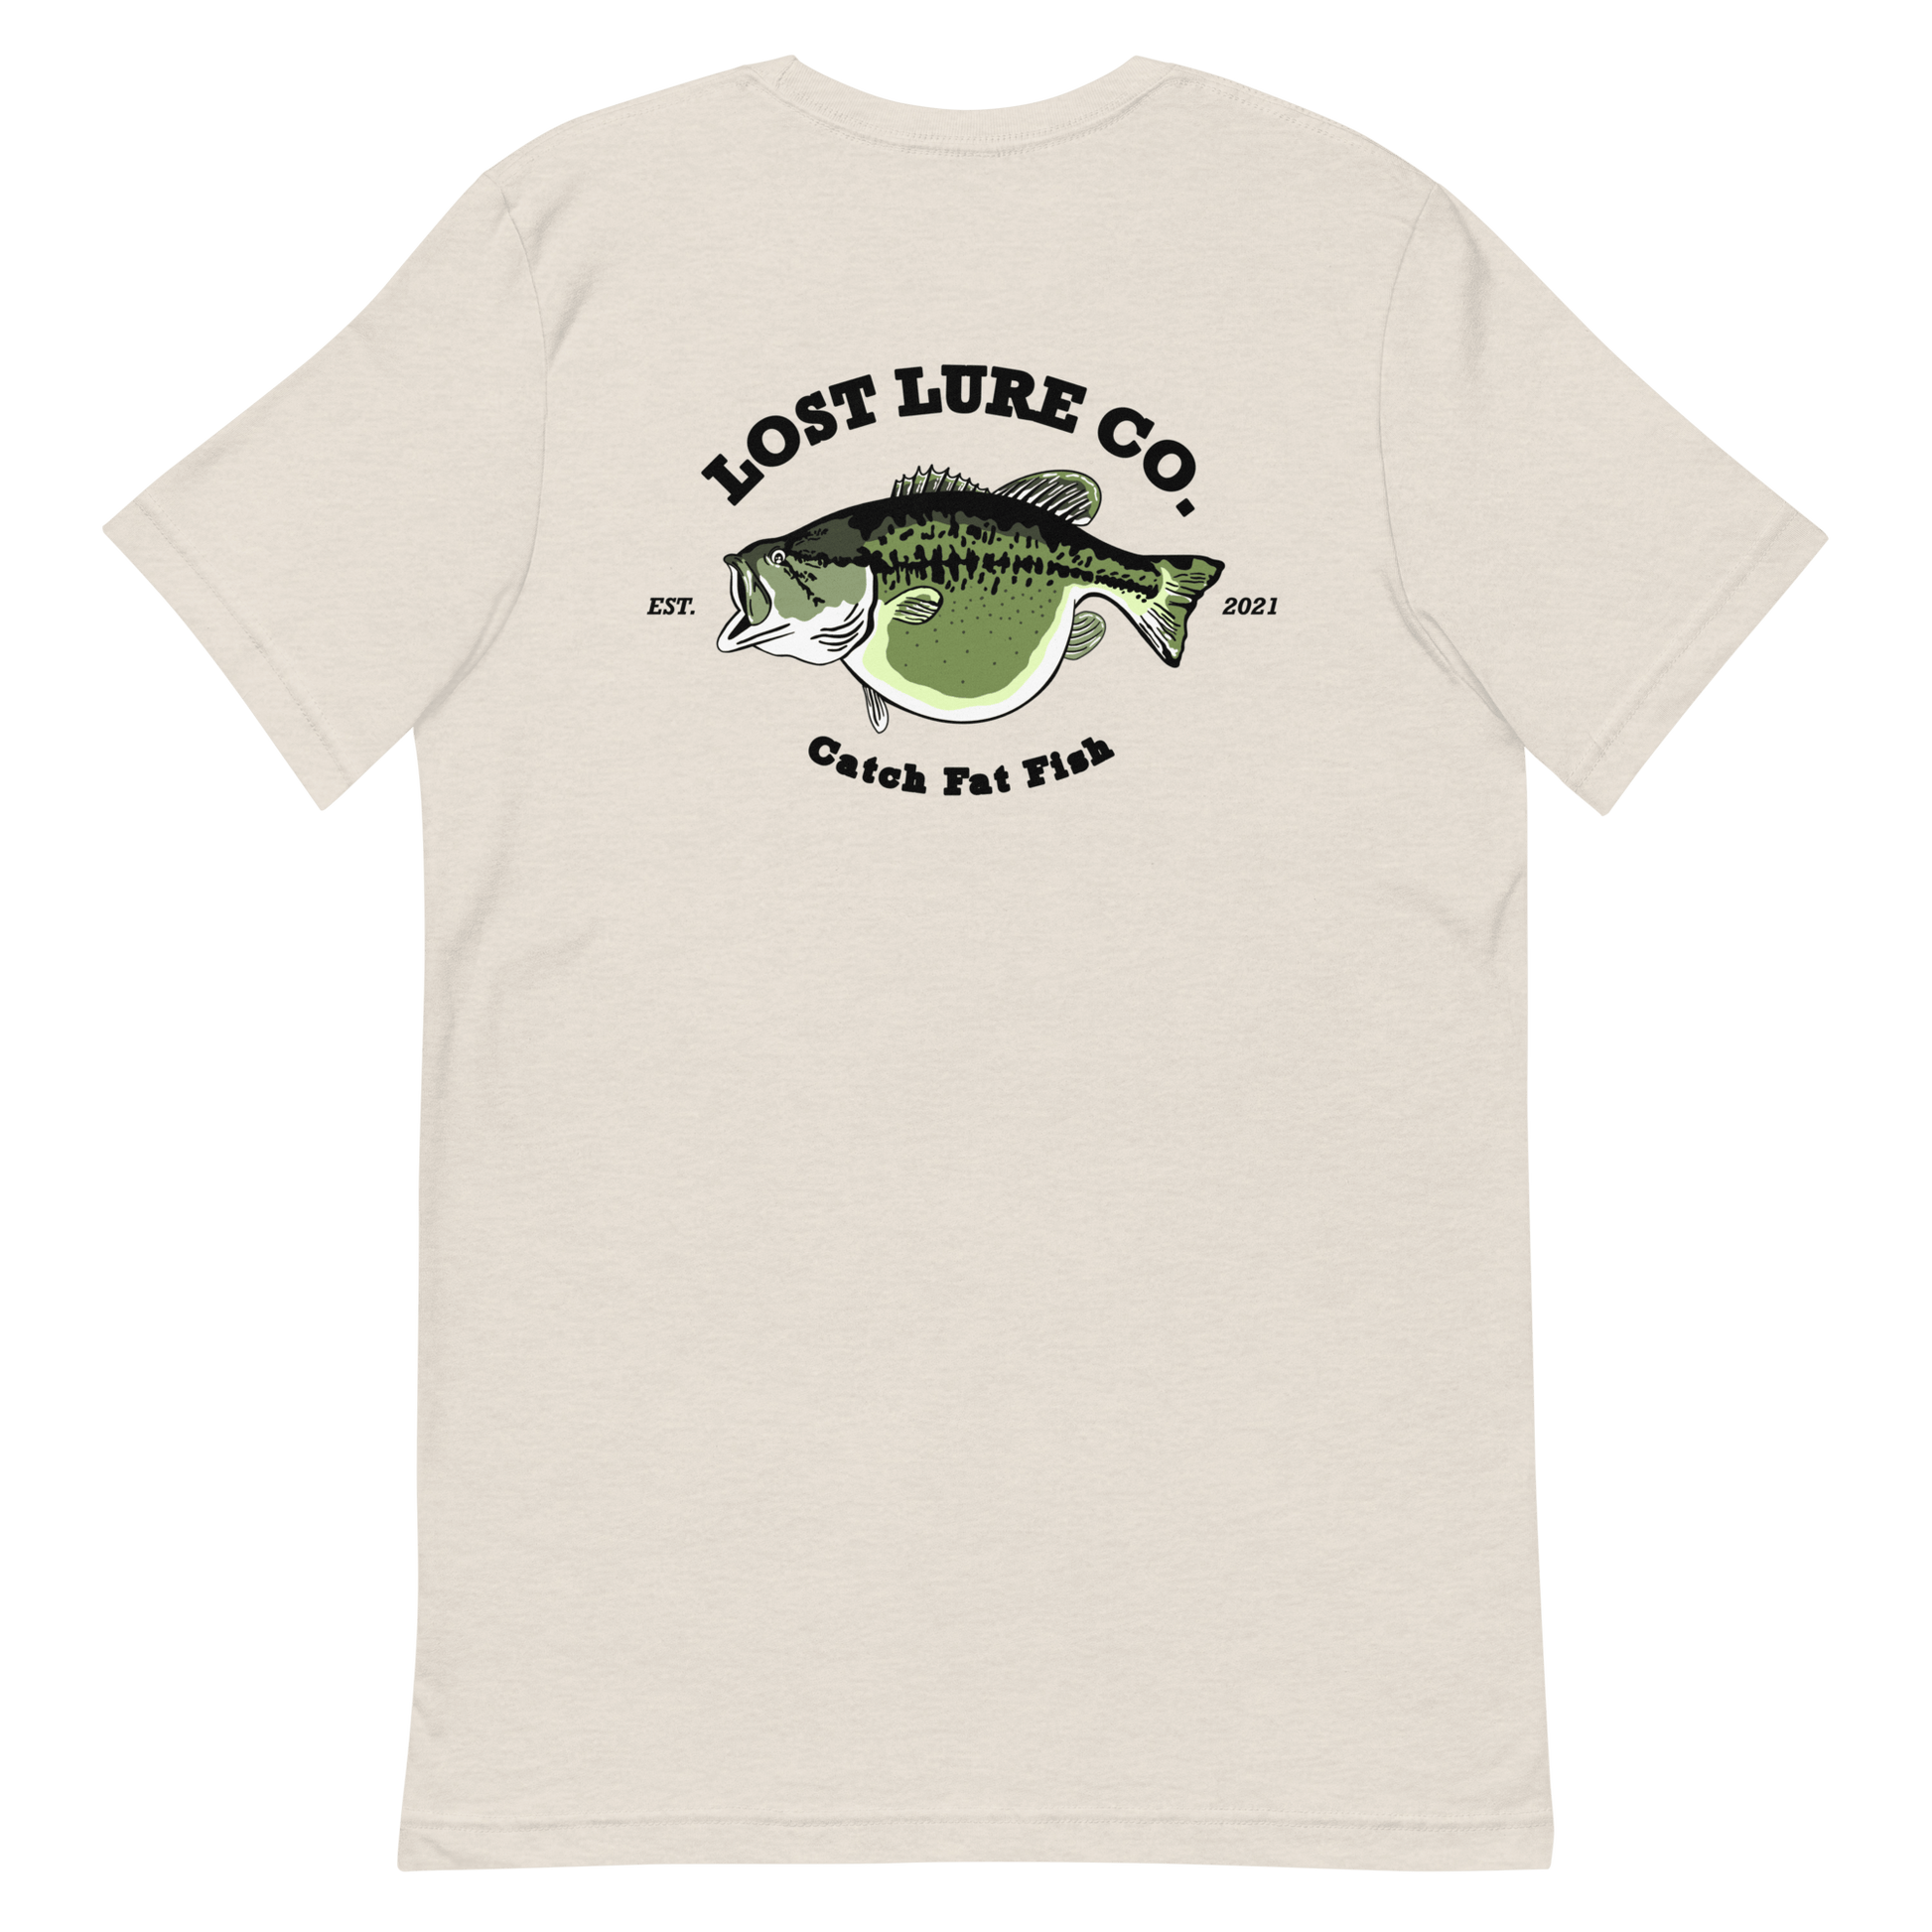 Catch Fat Fish T-Shirt – Lost Lure